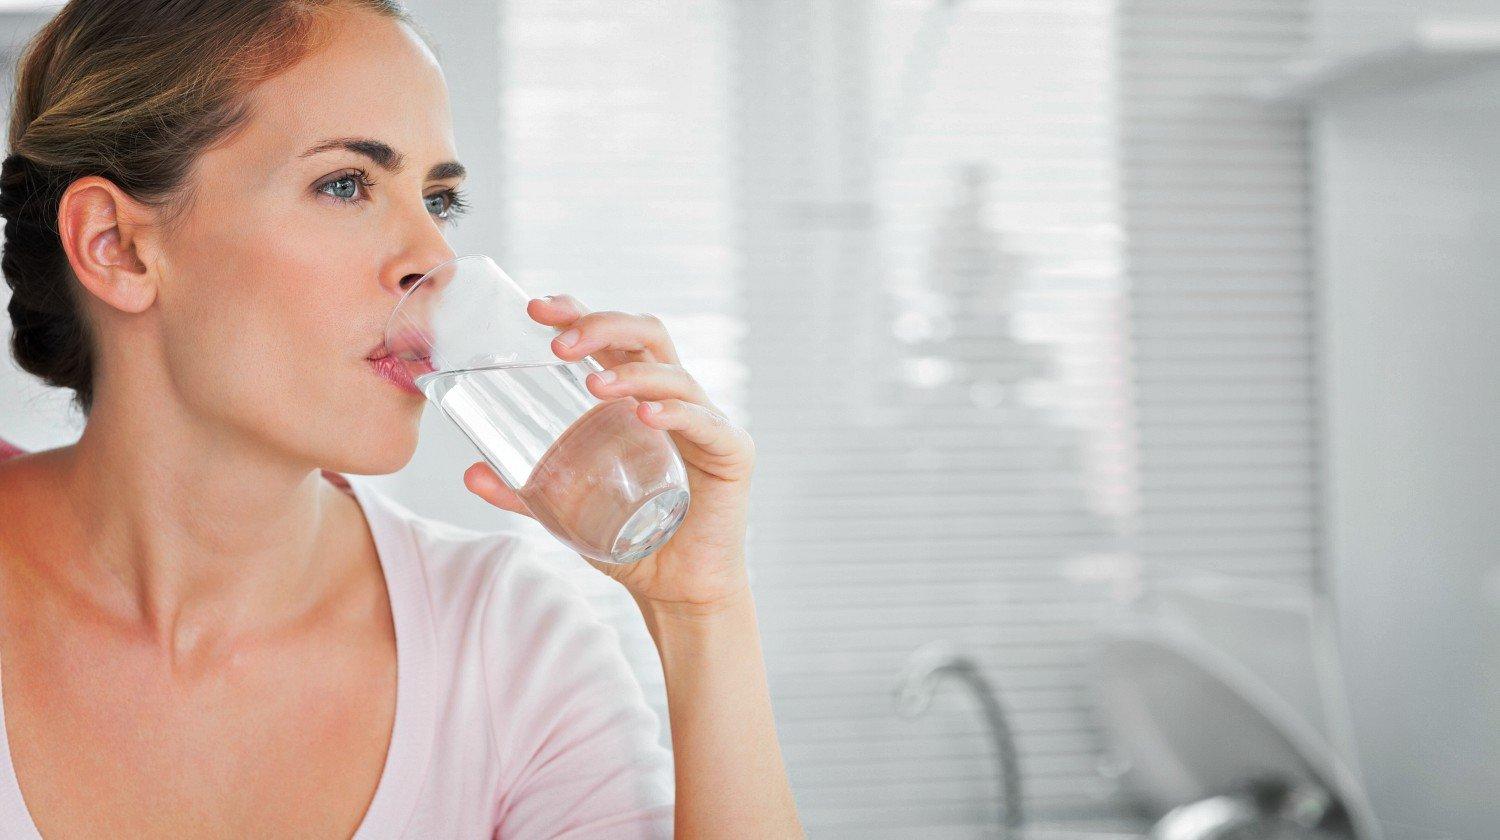 7 Approaches Drinking Extra Water Could Make You Healthier